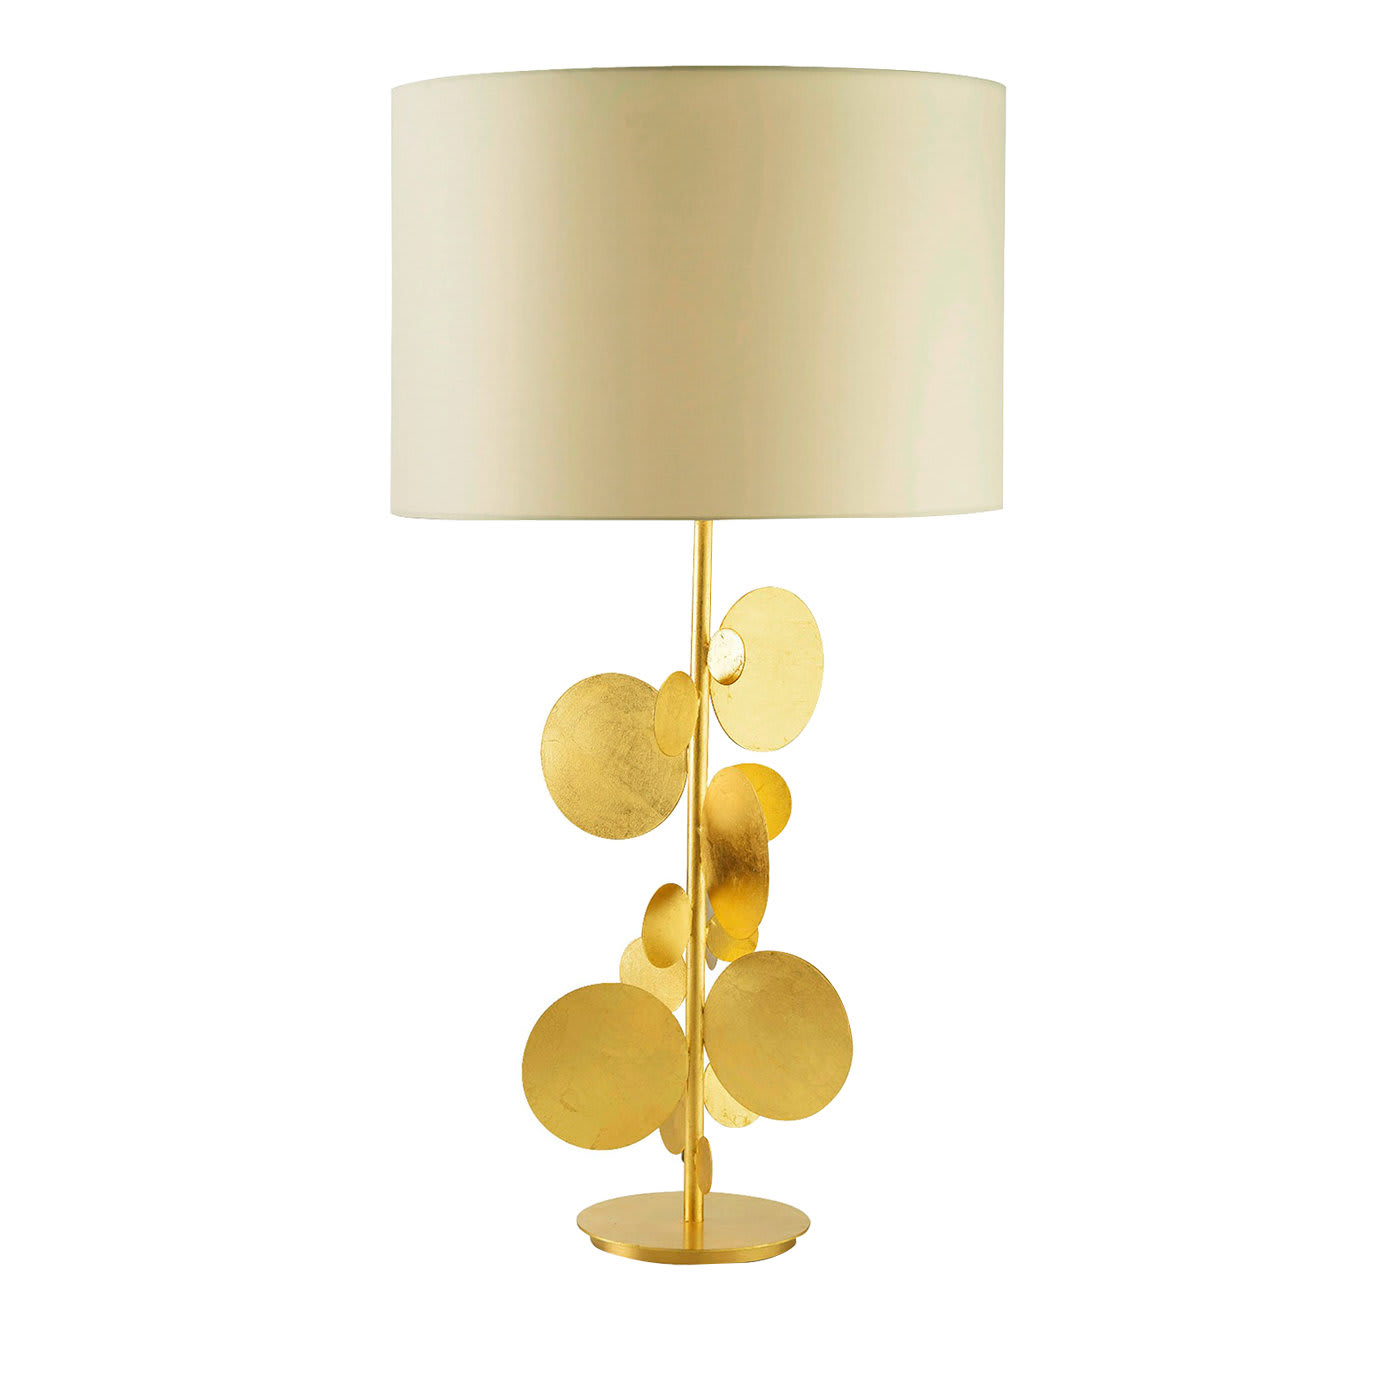 Orion Table Lamp - Marioni